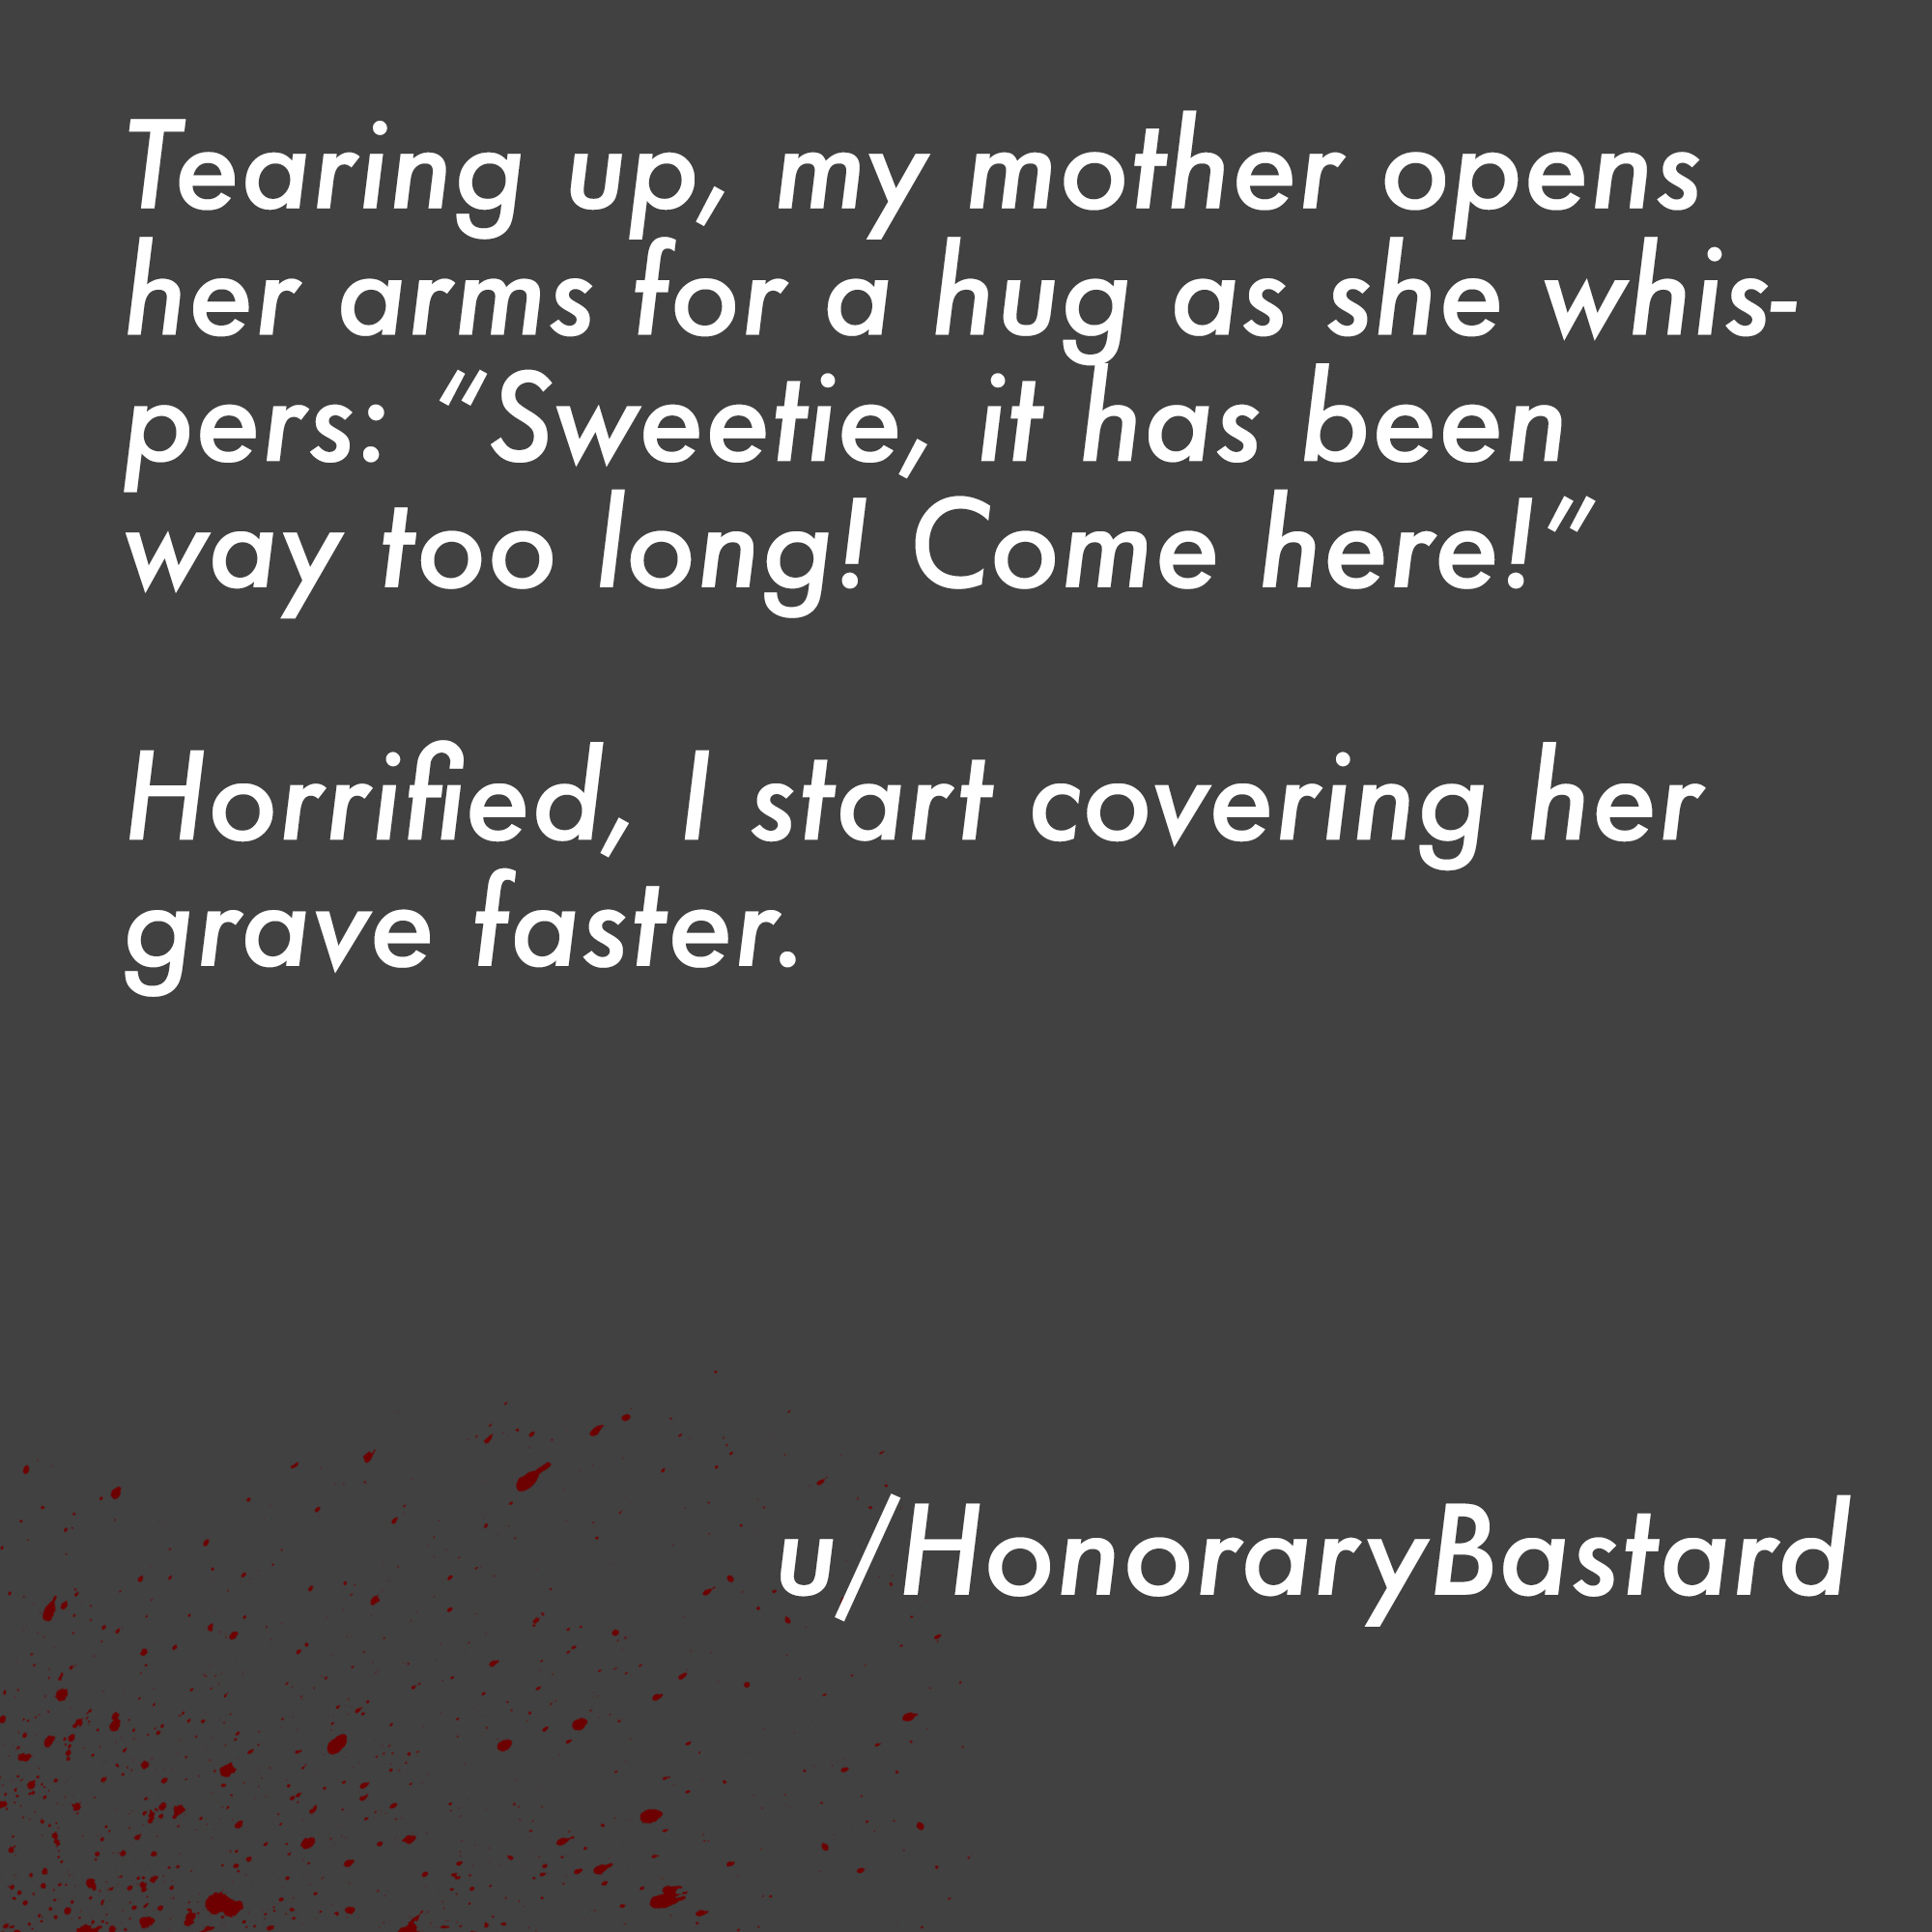 two line horror stories - angle - Tearing up, my mother opens her arms for a hug as she whis pers "Sweetie, it has been way too long! Come here!" Horrified, I start covering her grave faster. uHonoraryBastard